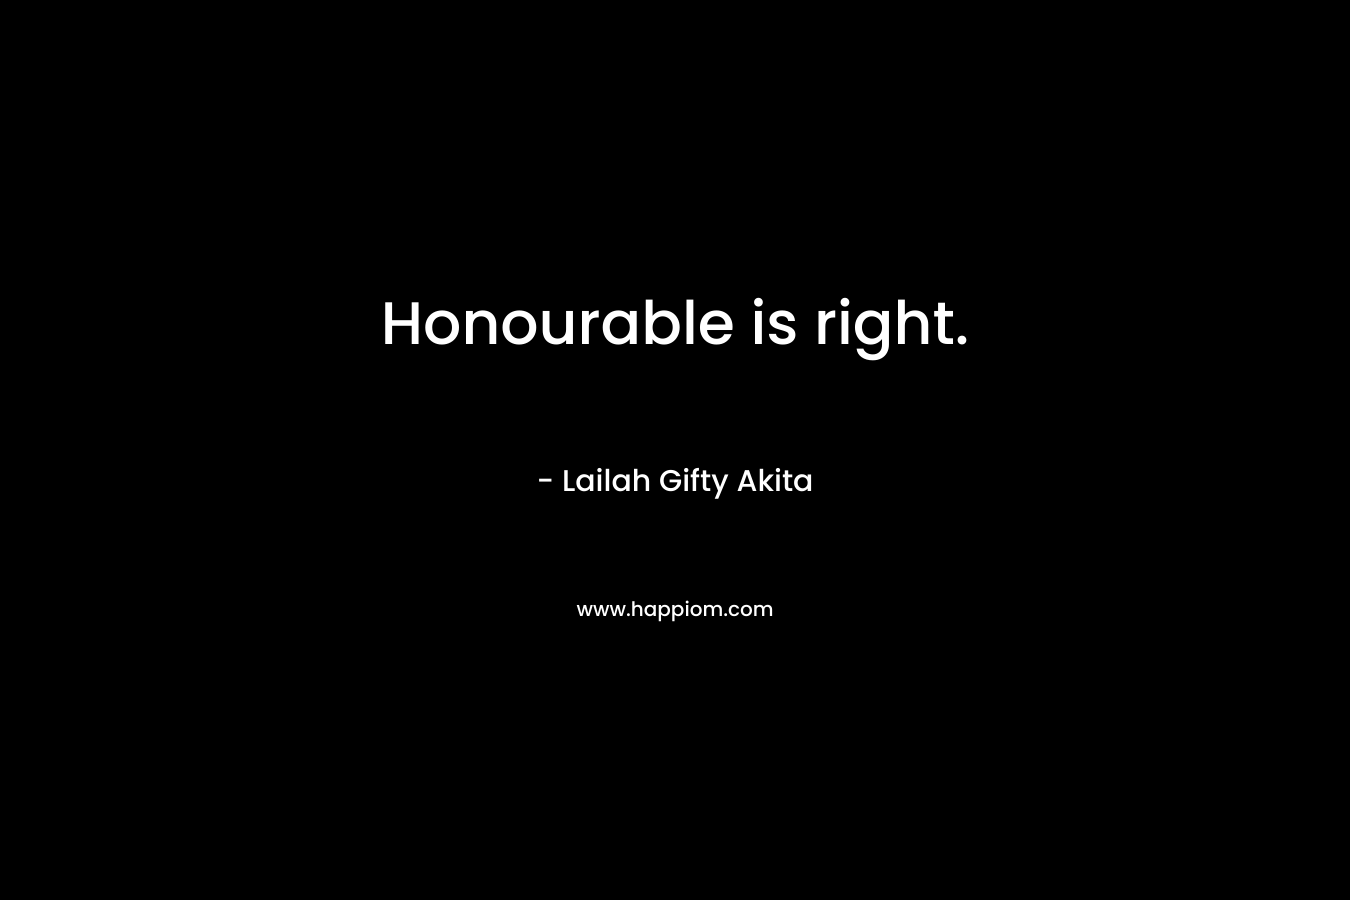 Honourable is right. – Lailah Gifty Akita